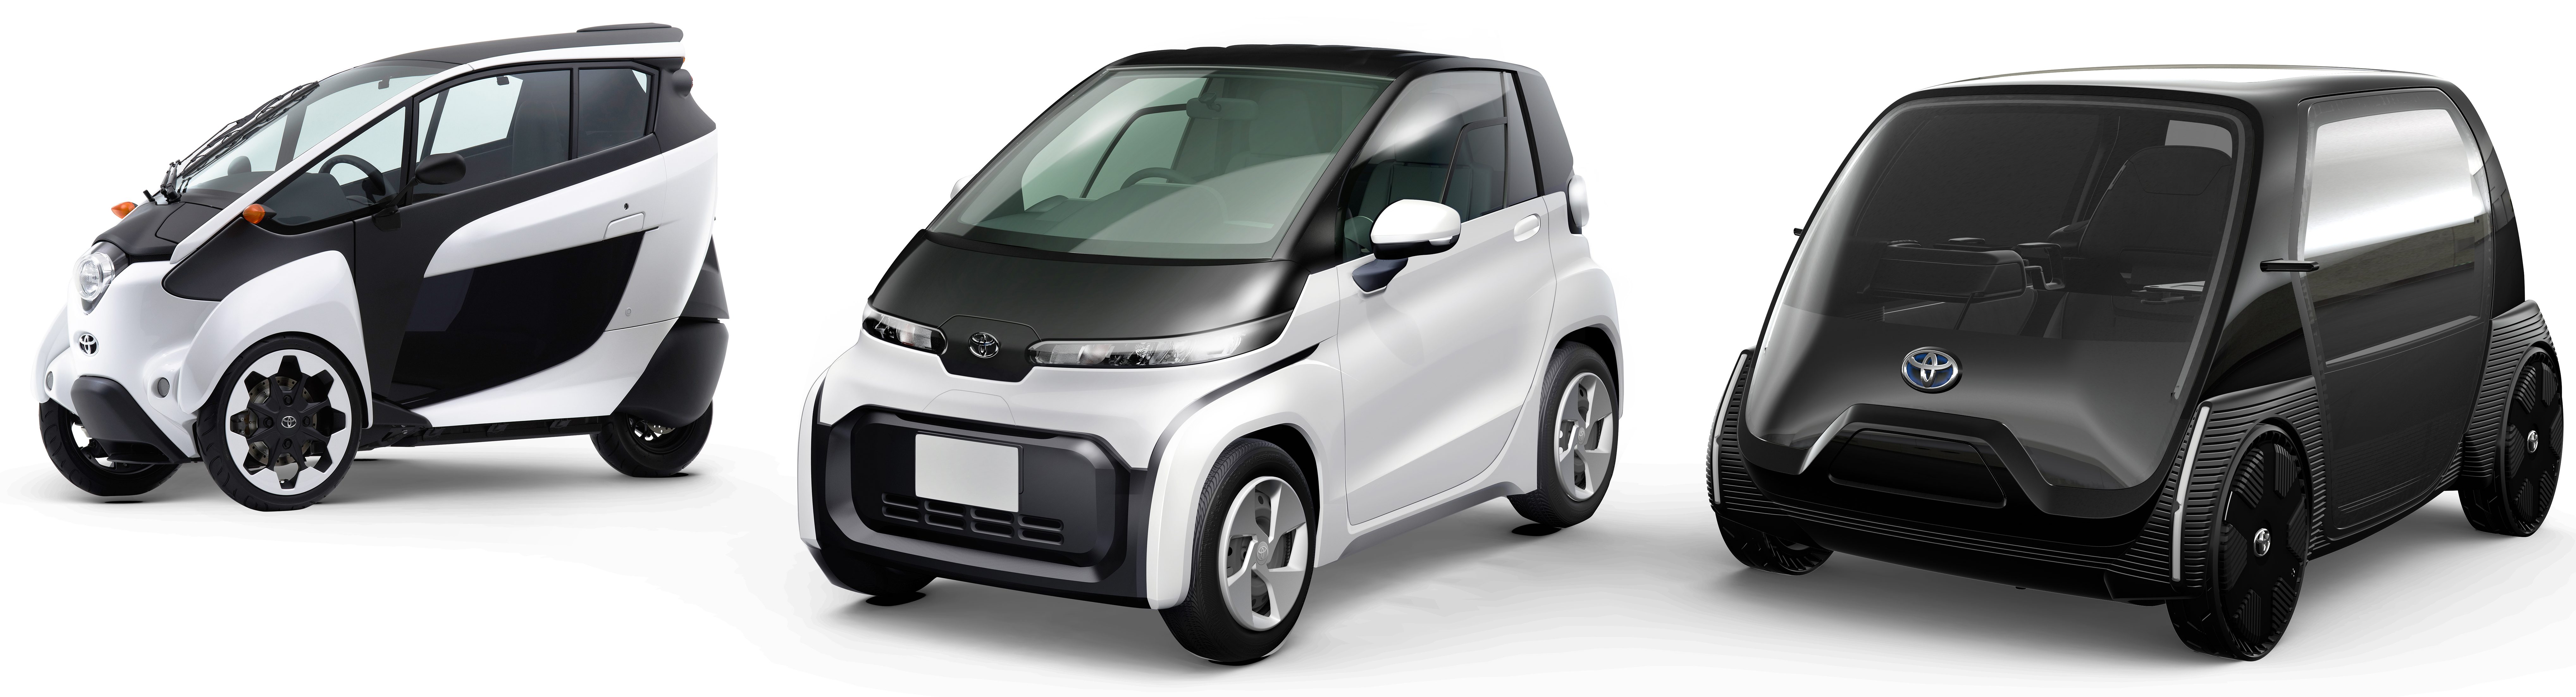 Toyota unveils images of upcoming all-electric cars, accelerates EV ...